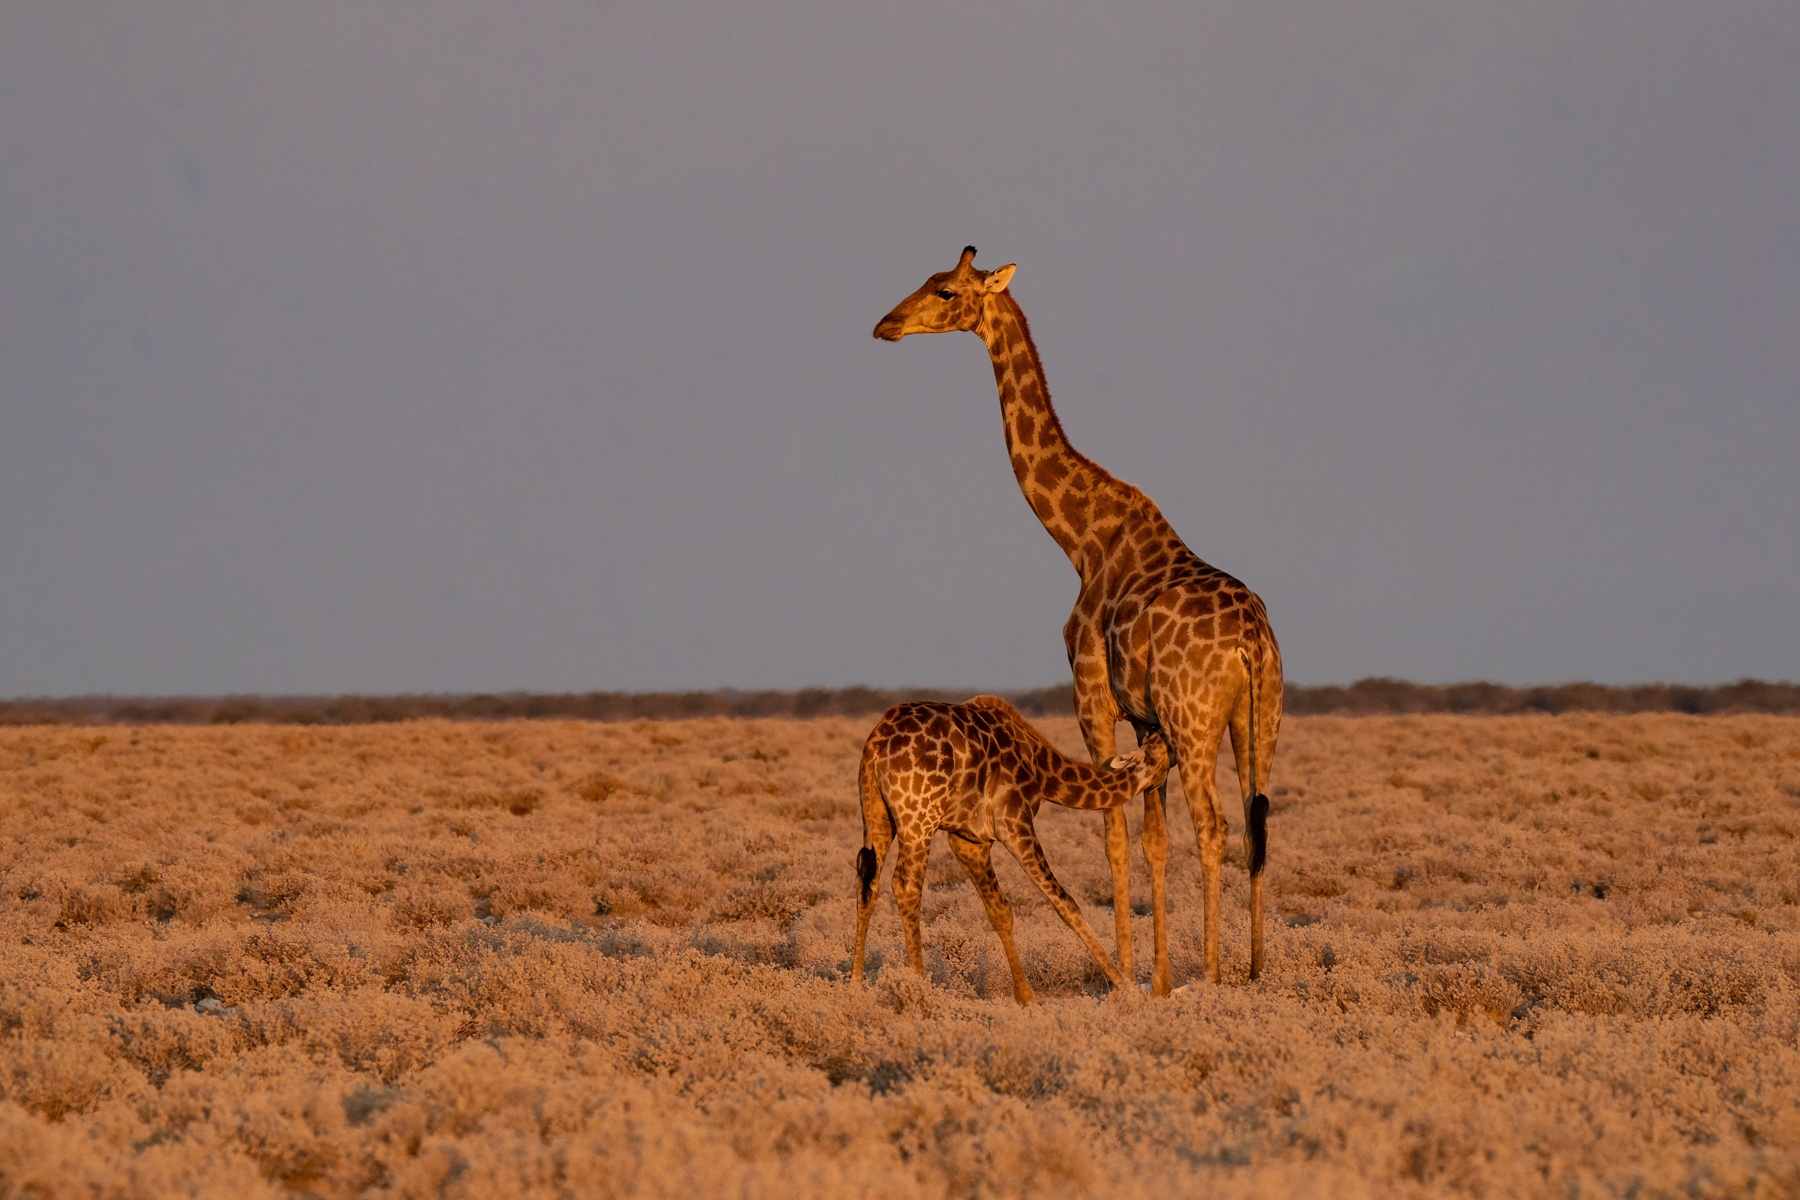 At first light in Etosha, a mother giraffe nurtures her baby on our Namibia wildlife photography tour